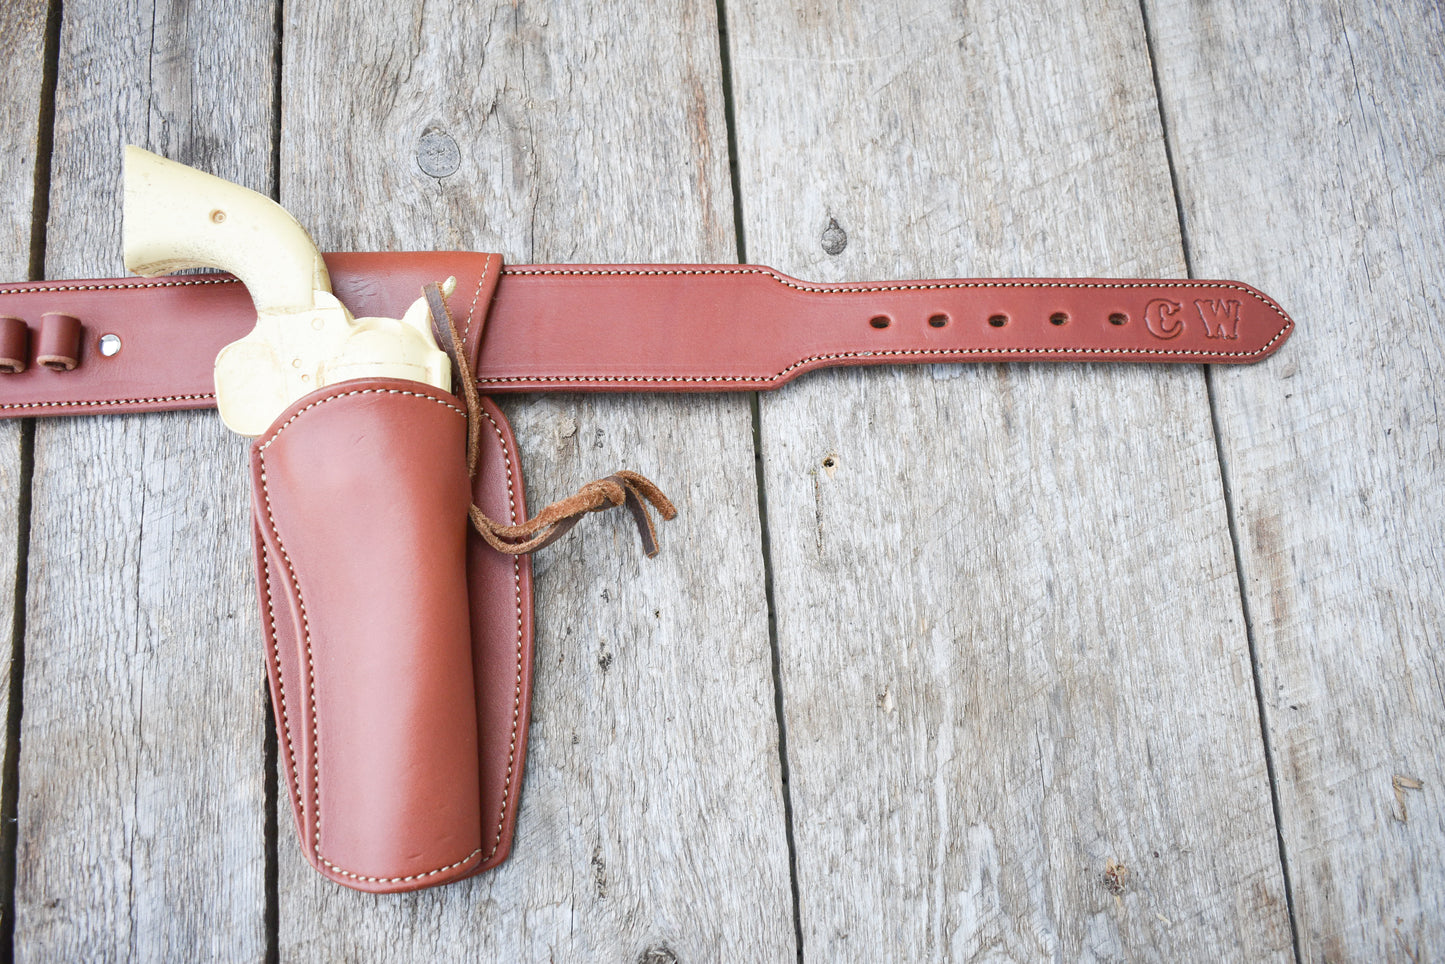 The Shootist Leather Cartridge Belt, Western Cartridge Belt, Eastwood style Belt with Double Fast Draw holsters, lined